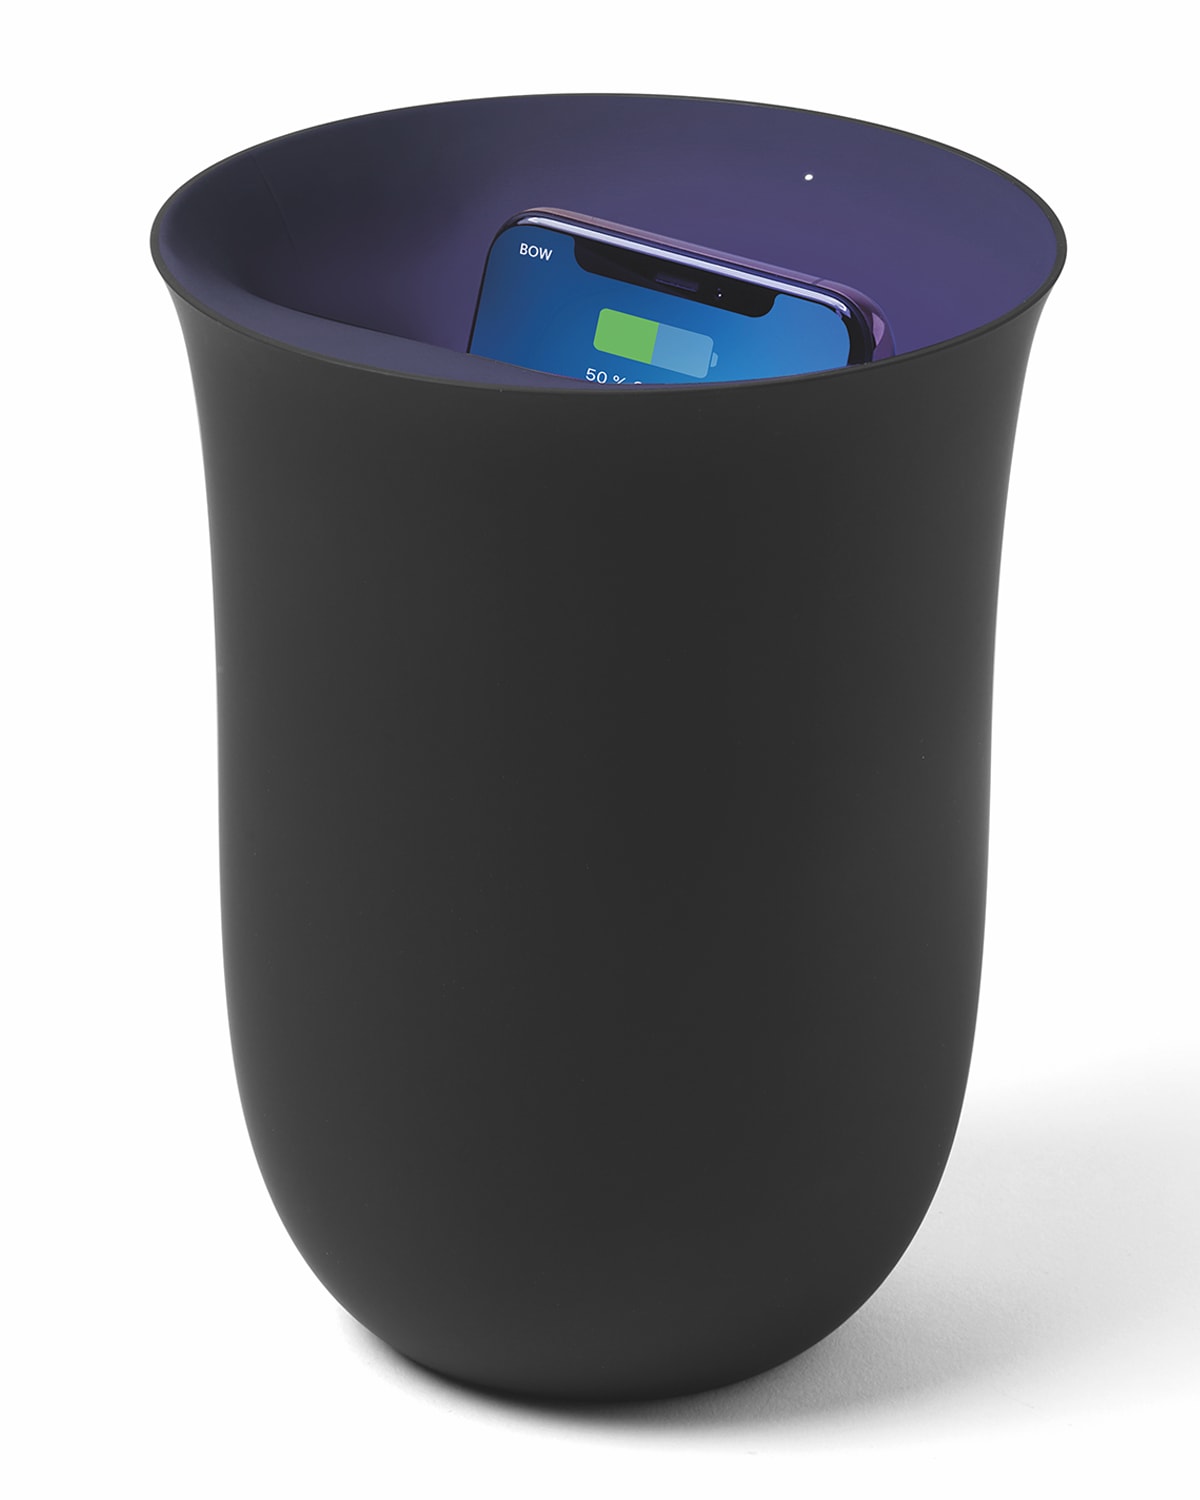 OBLIO Wireless Charging Station with Built-In UV Sanitizer